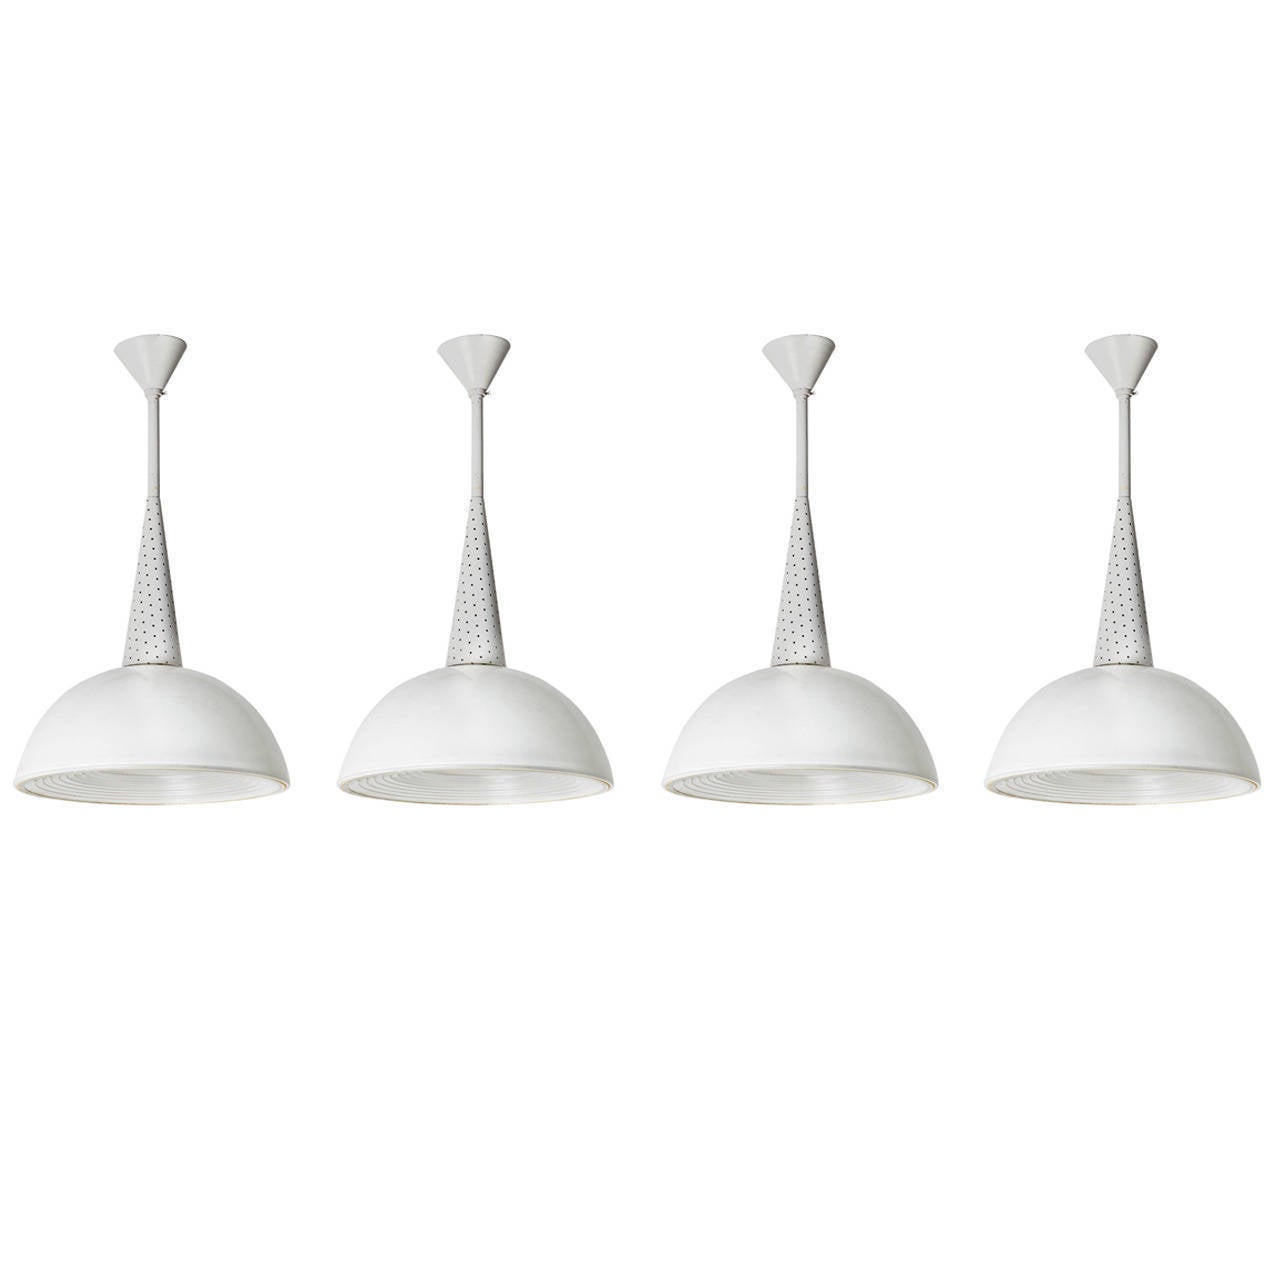 Four pendant lights in enameled metal and opaline.
Italy, 1960s-1970s.